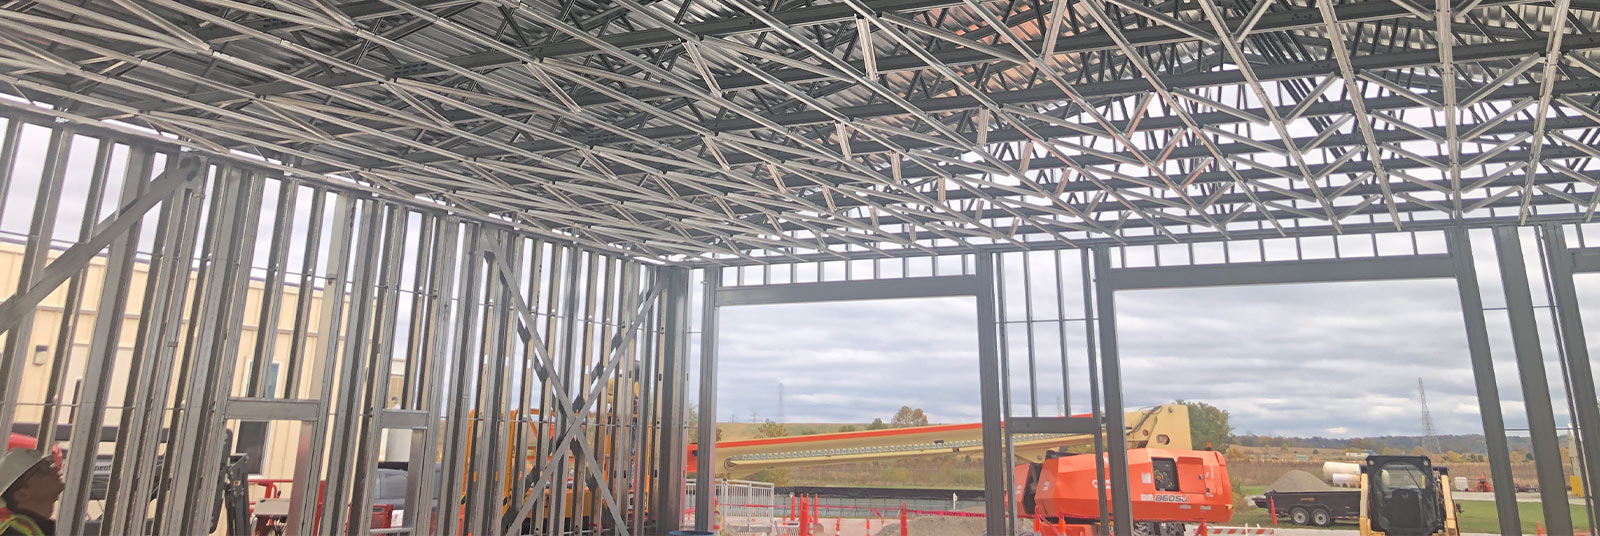 The steel structure at Department of Energy Fernald.